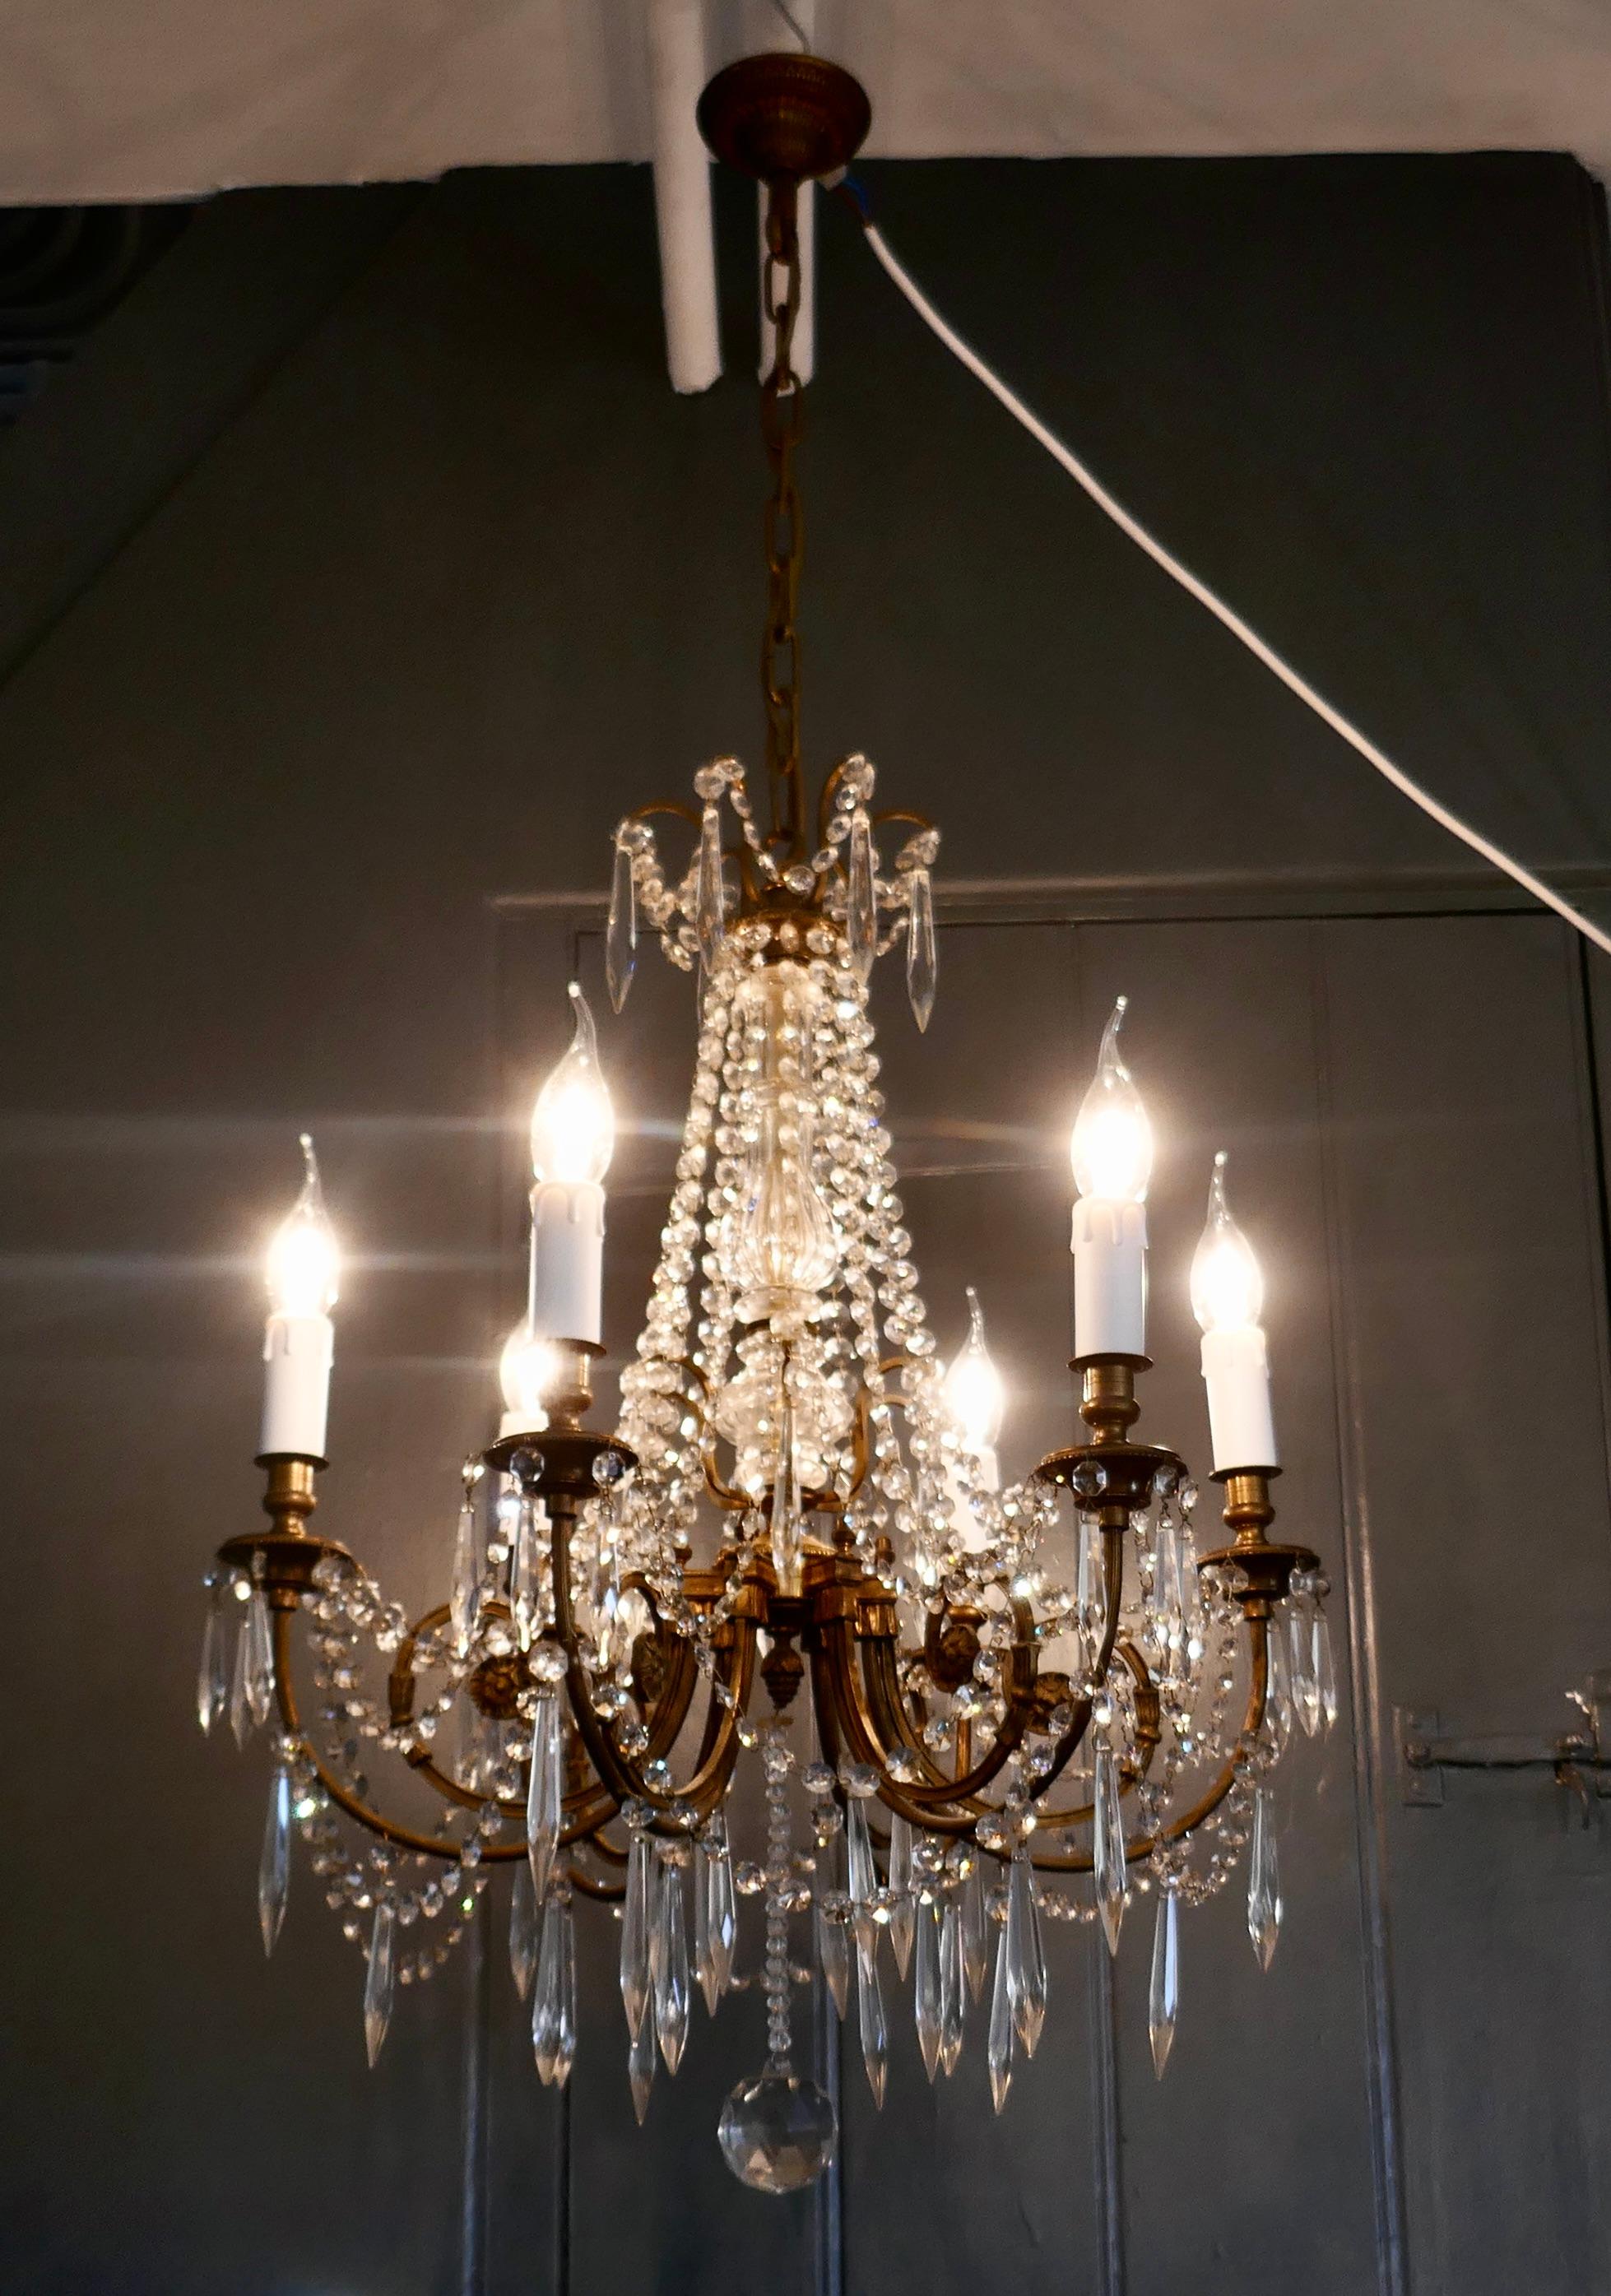 A large French crystal 6 branch salon chandelier

This is a superb French chandelier, the brass arms and sconces have a gilt finish, The light is hung with long chains and pendants
There is a further layer of lustres around the brass chain at the